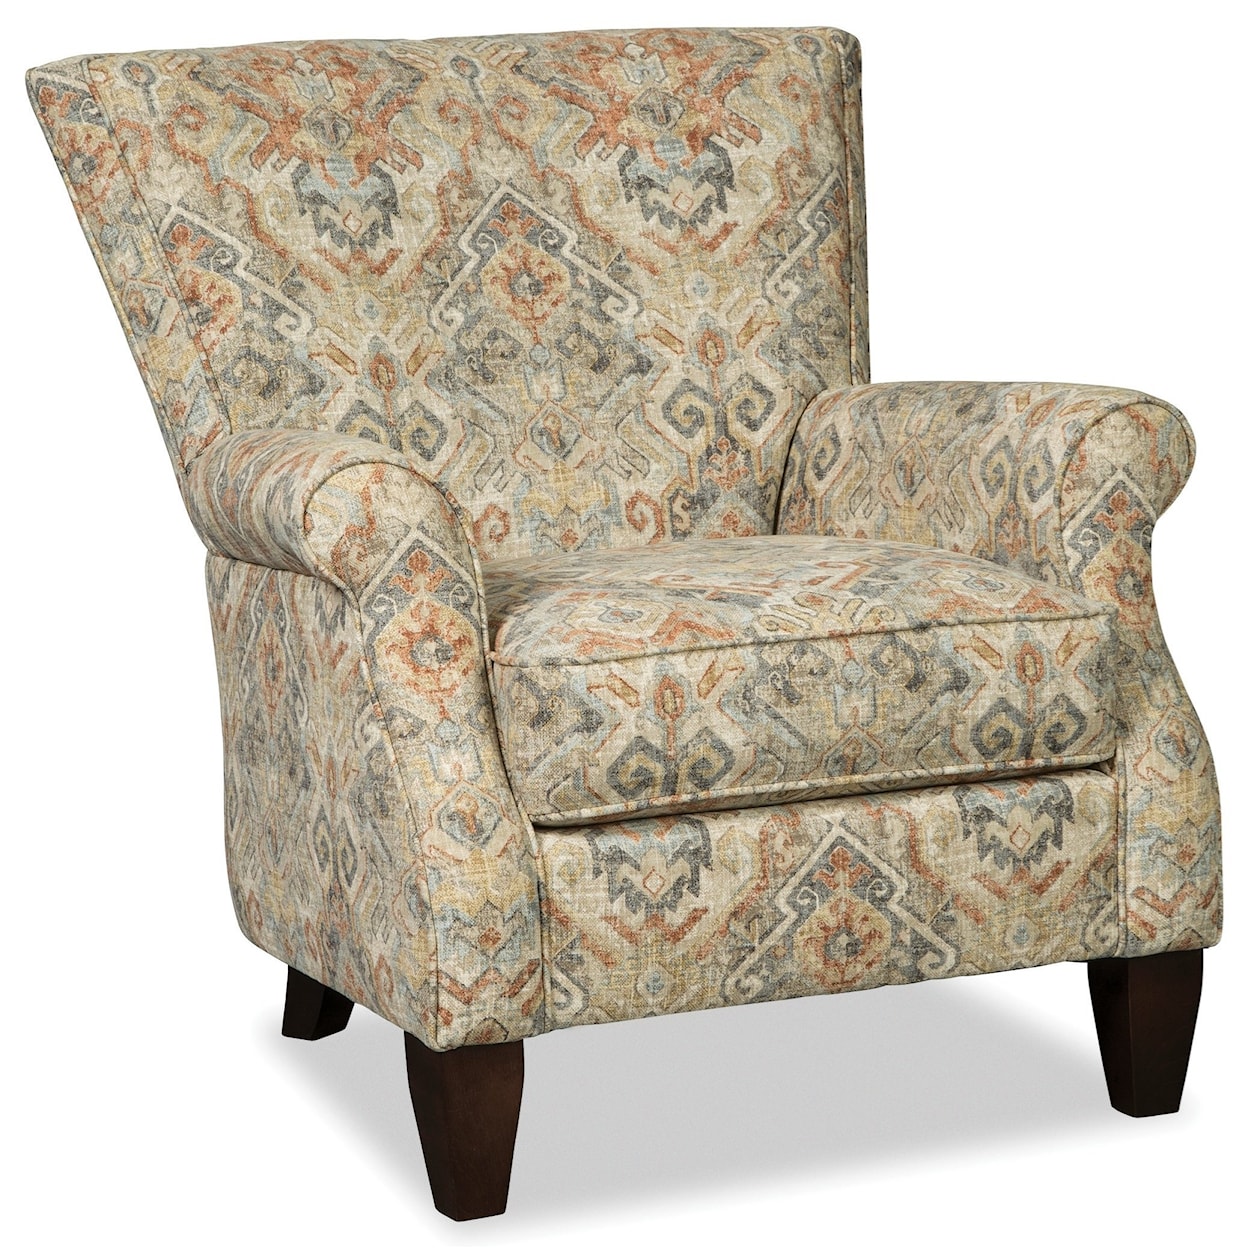 Hickorycraft 061310 Upholstered Arm Chair